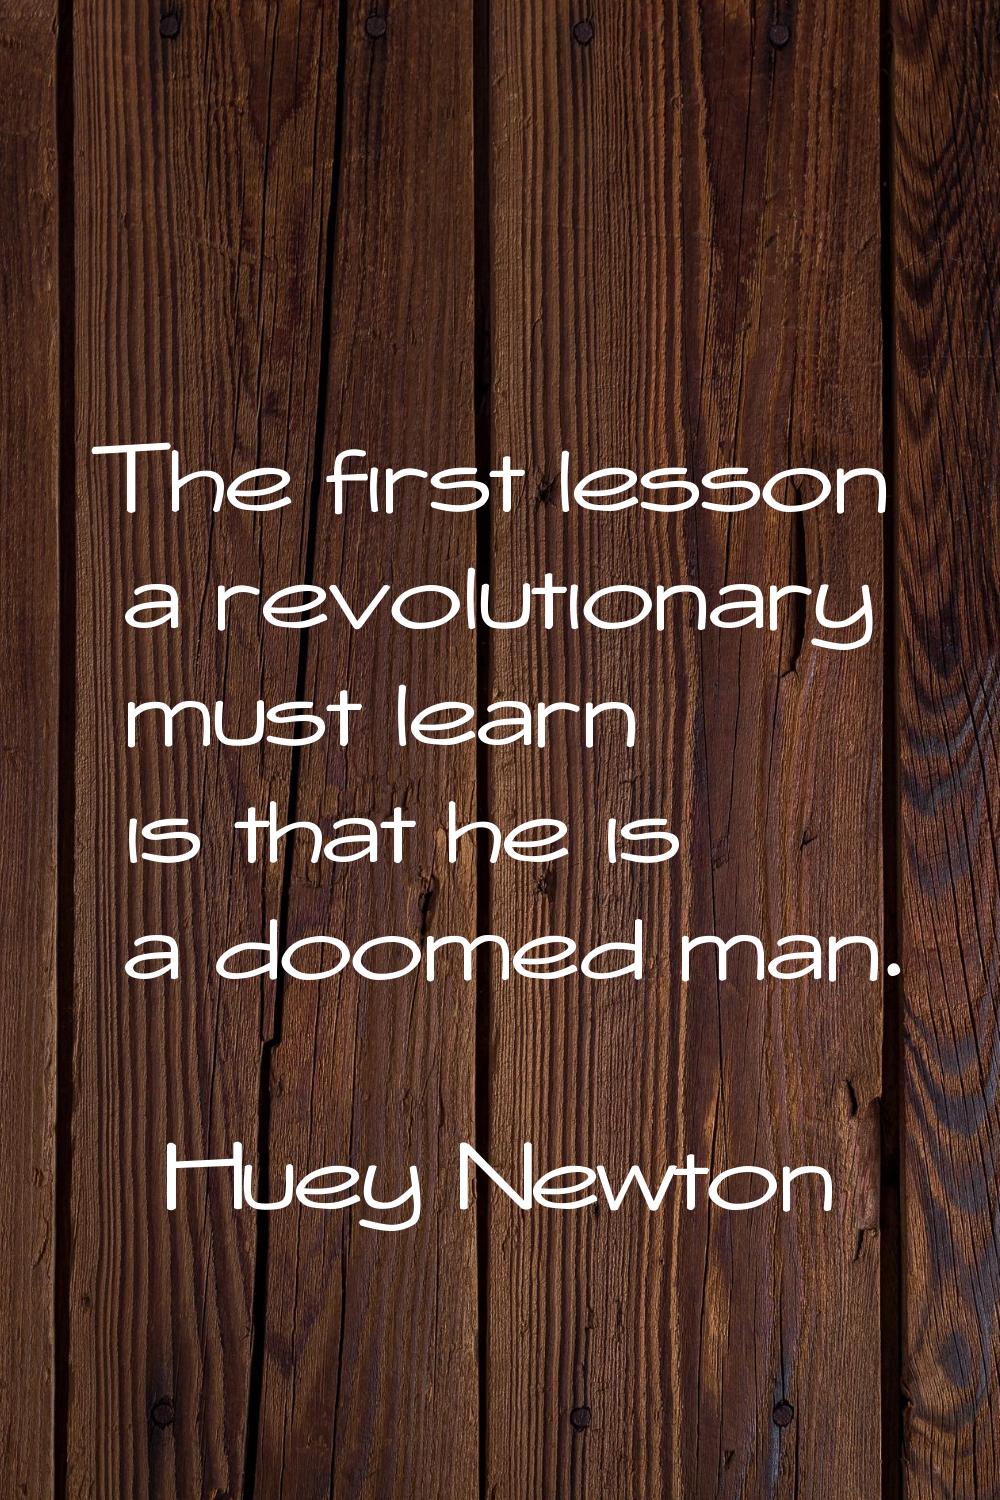 The first lesson a revolutionary must learn is that he is a doomed man.